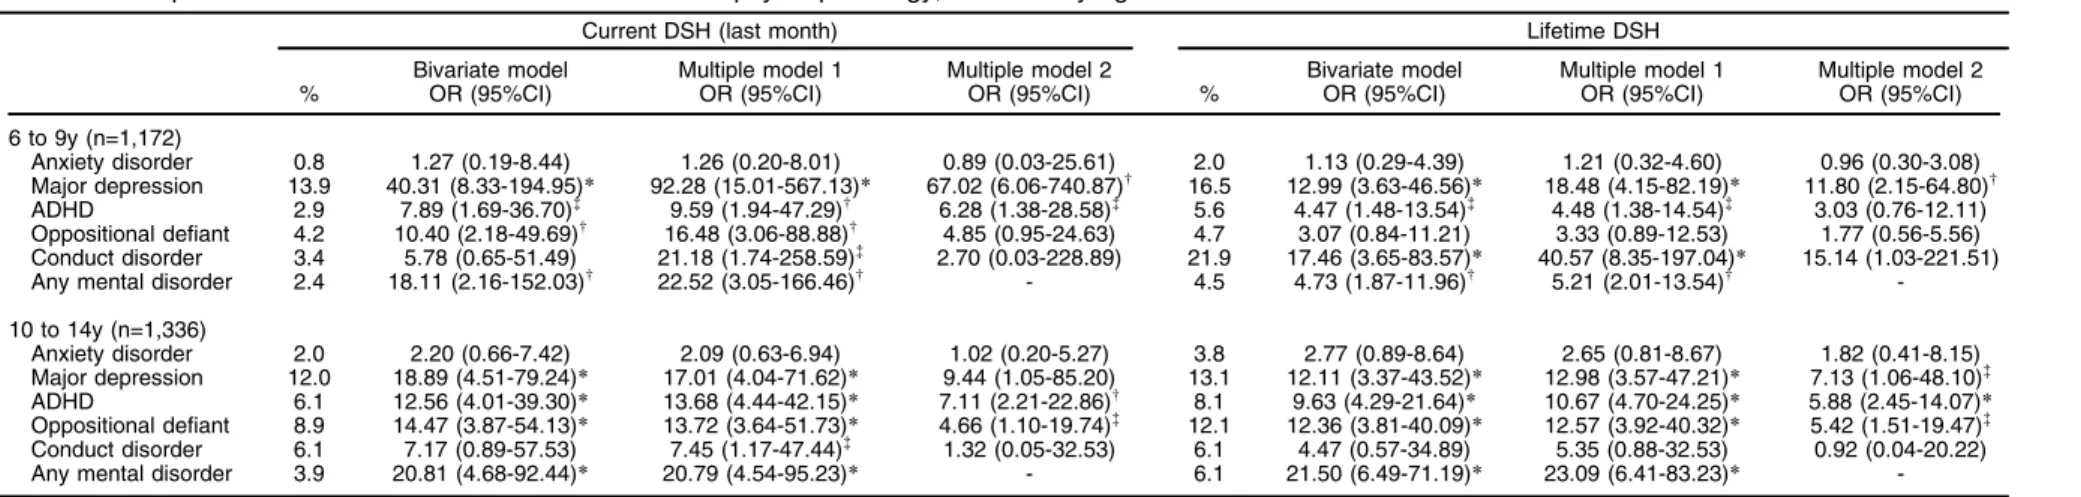 Table 4 DSH prevalence and associations with current child psychopathology, stratified by age